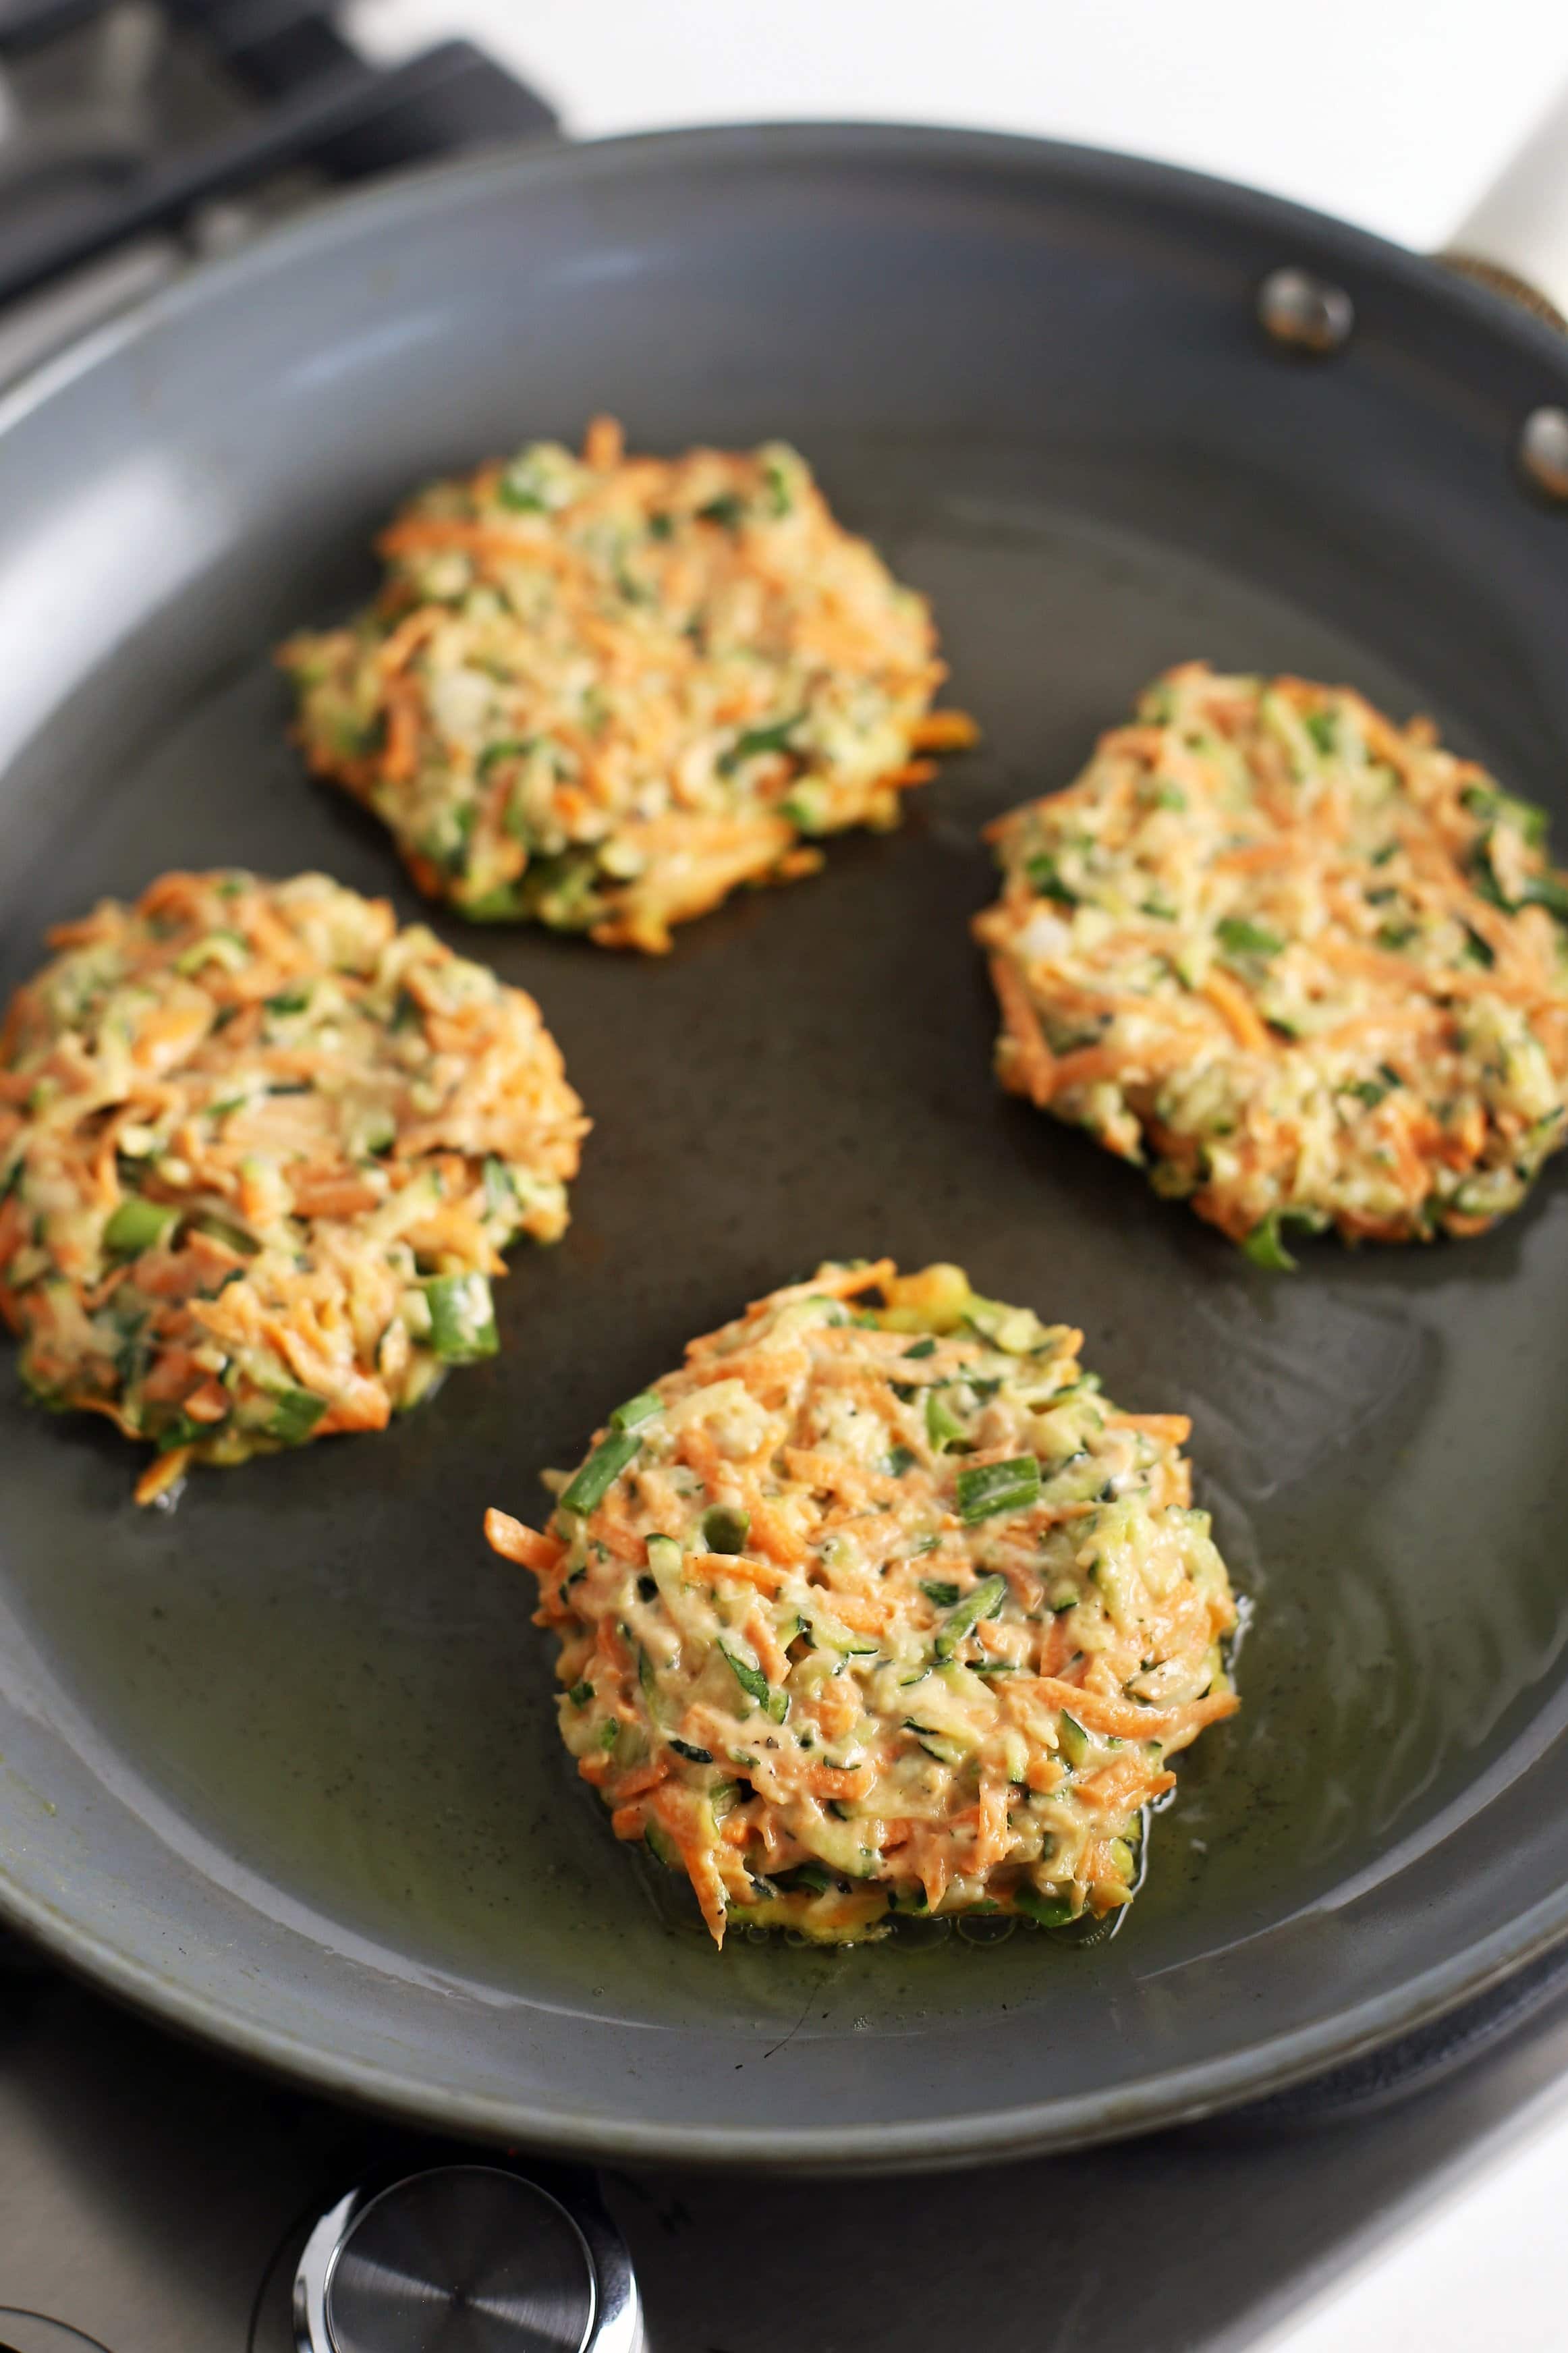 Four zucchini carrot pancakes frying in a small amount of olive oil in a large frying pan.